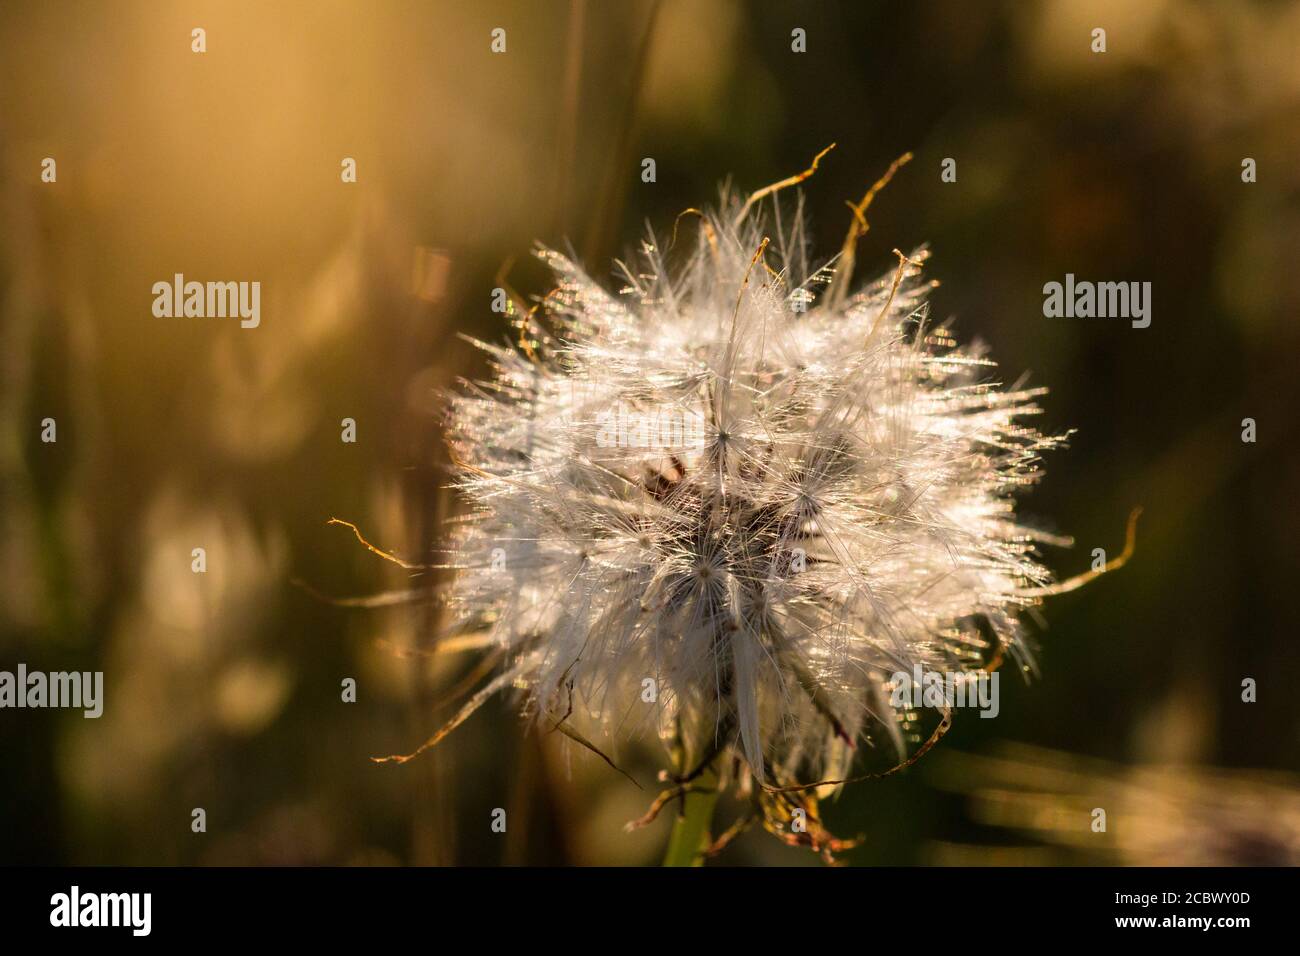 Dandelion (Taraxacum officinale) seeds in the head caught with the setting sun behind Stock Photo